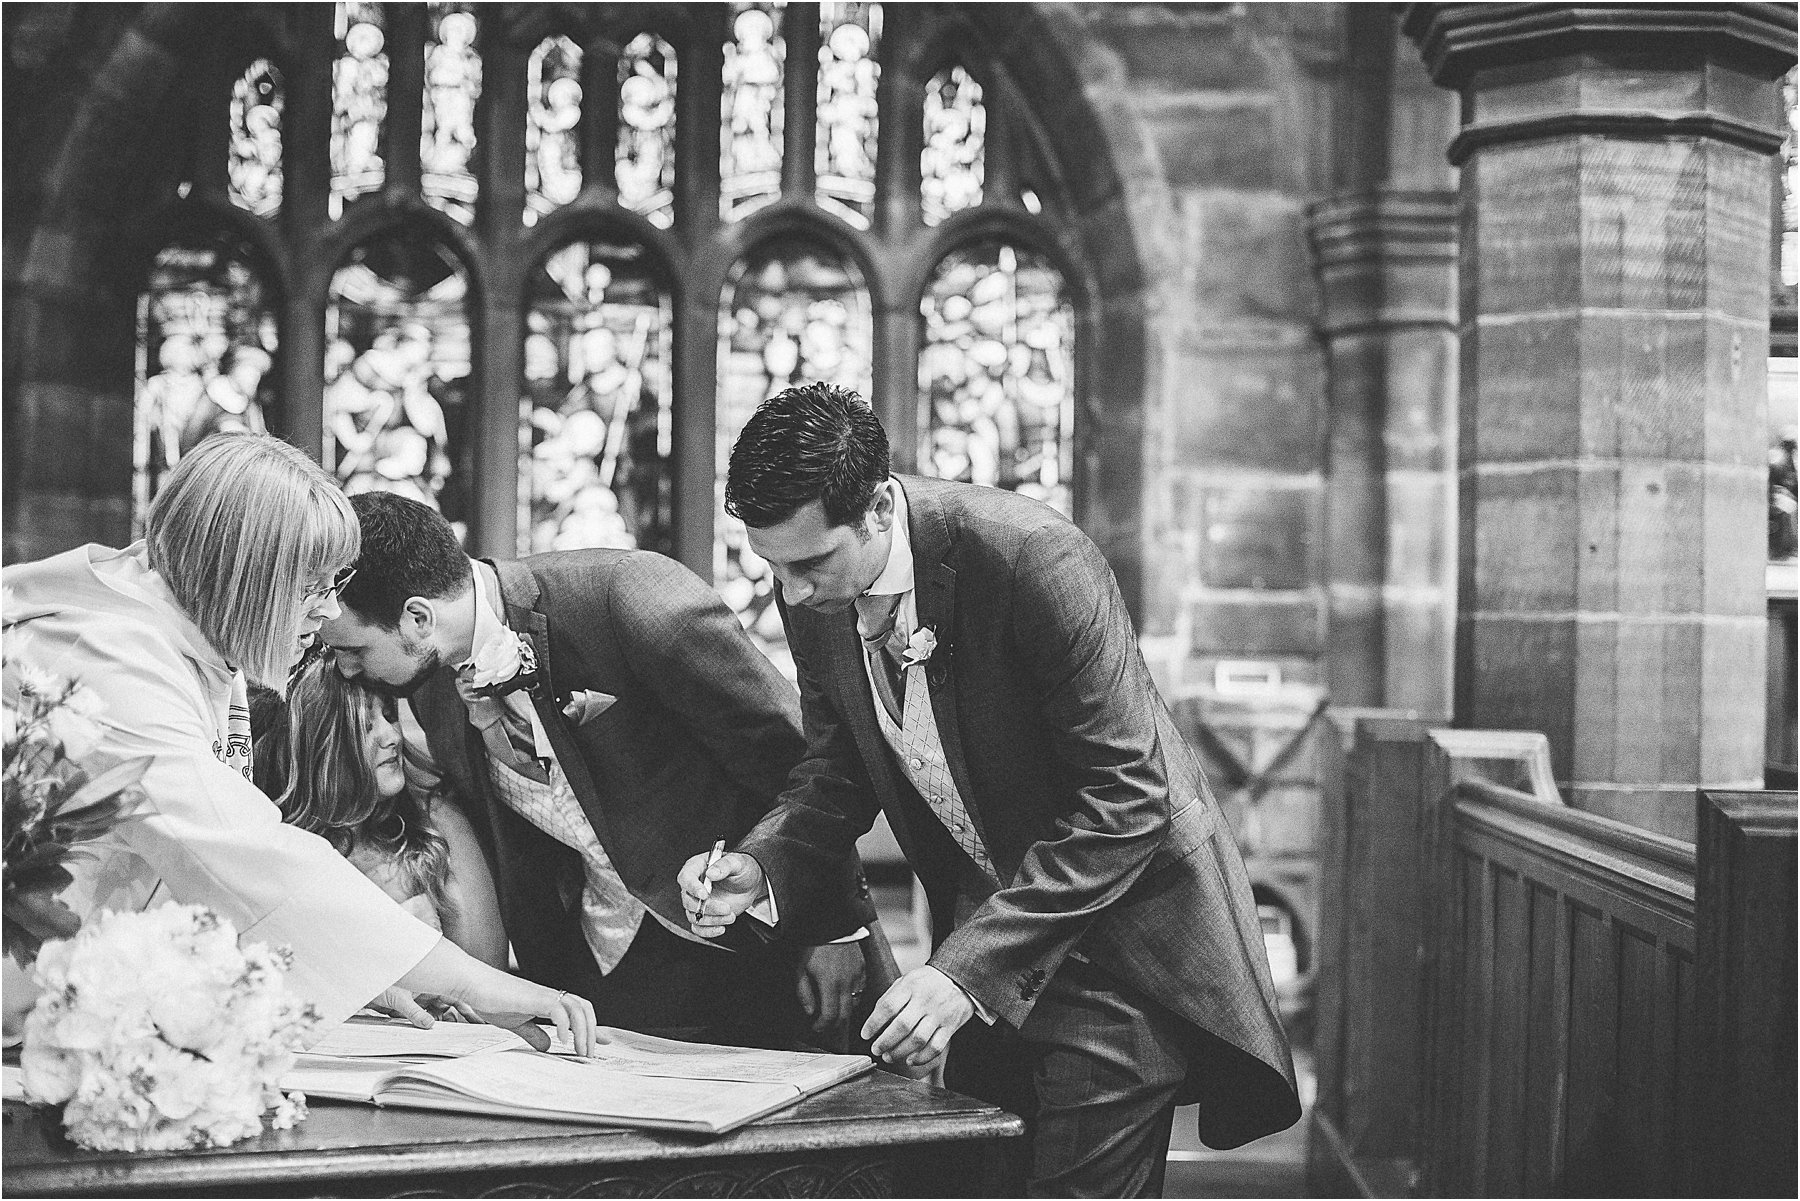 Combermere_Abbey_Wedding_Photography_0072